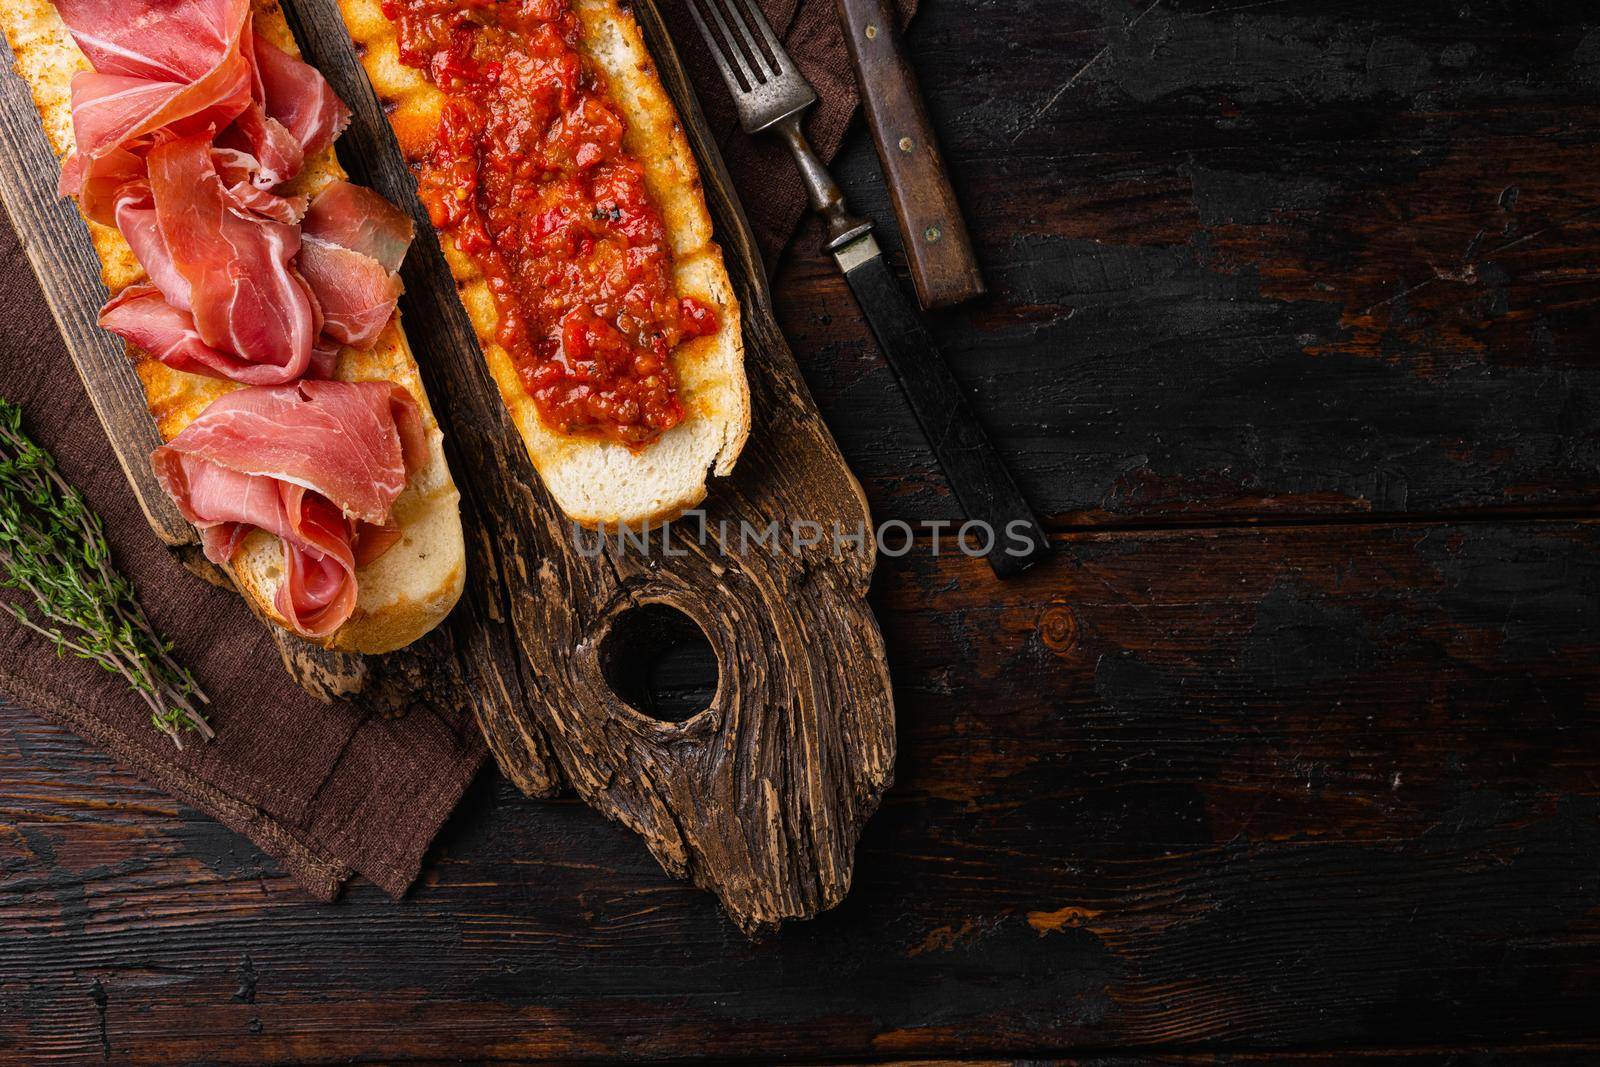 Spanish cured serrano ham with olive oil and toasted bread, on old dark wooden table background, top view flat lay, with copy space for text by Ilianesolenyi